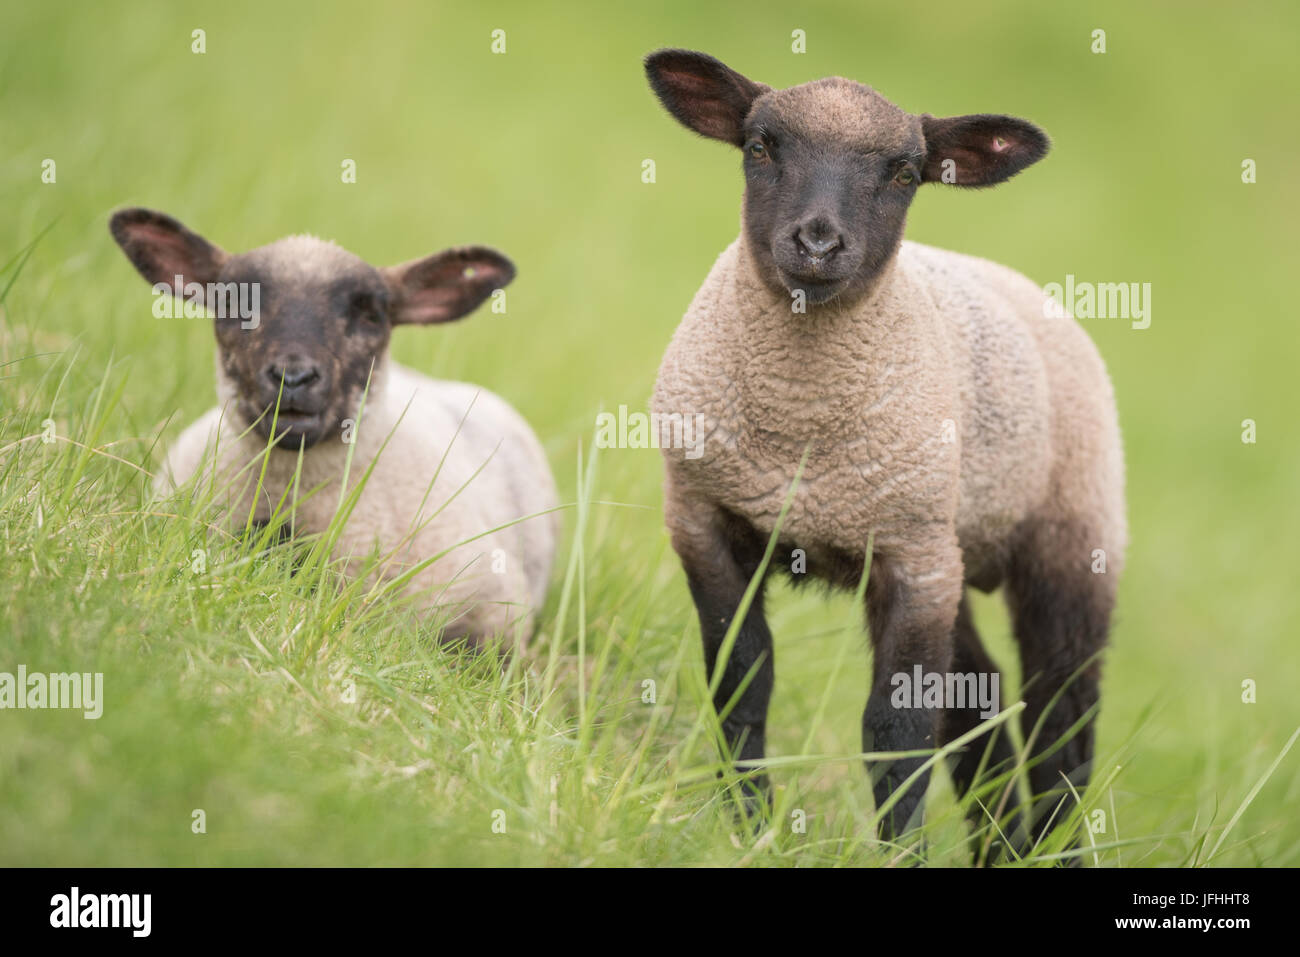 Young sheep with black head. Stock Photo